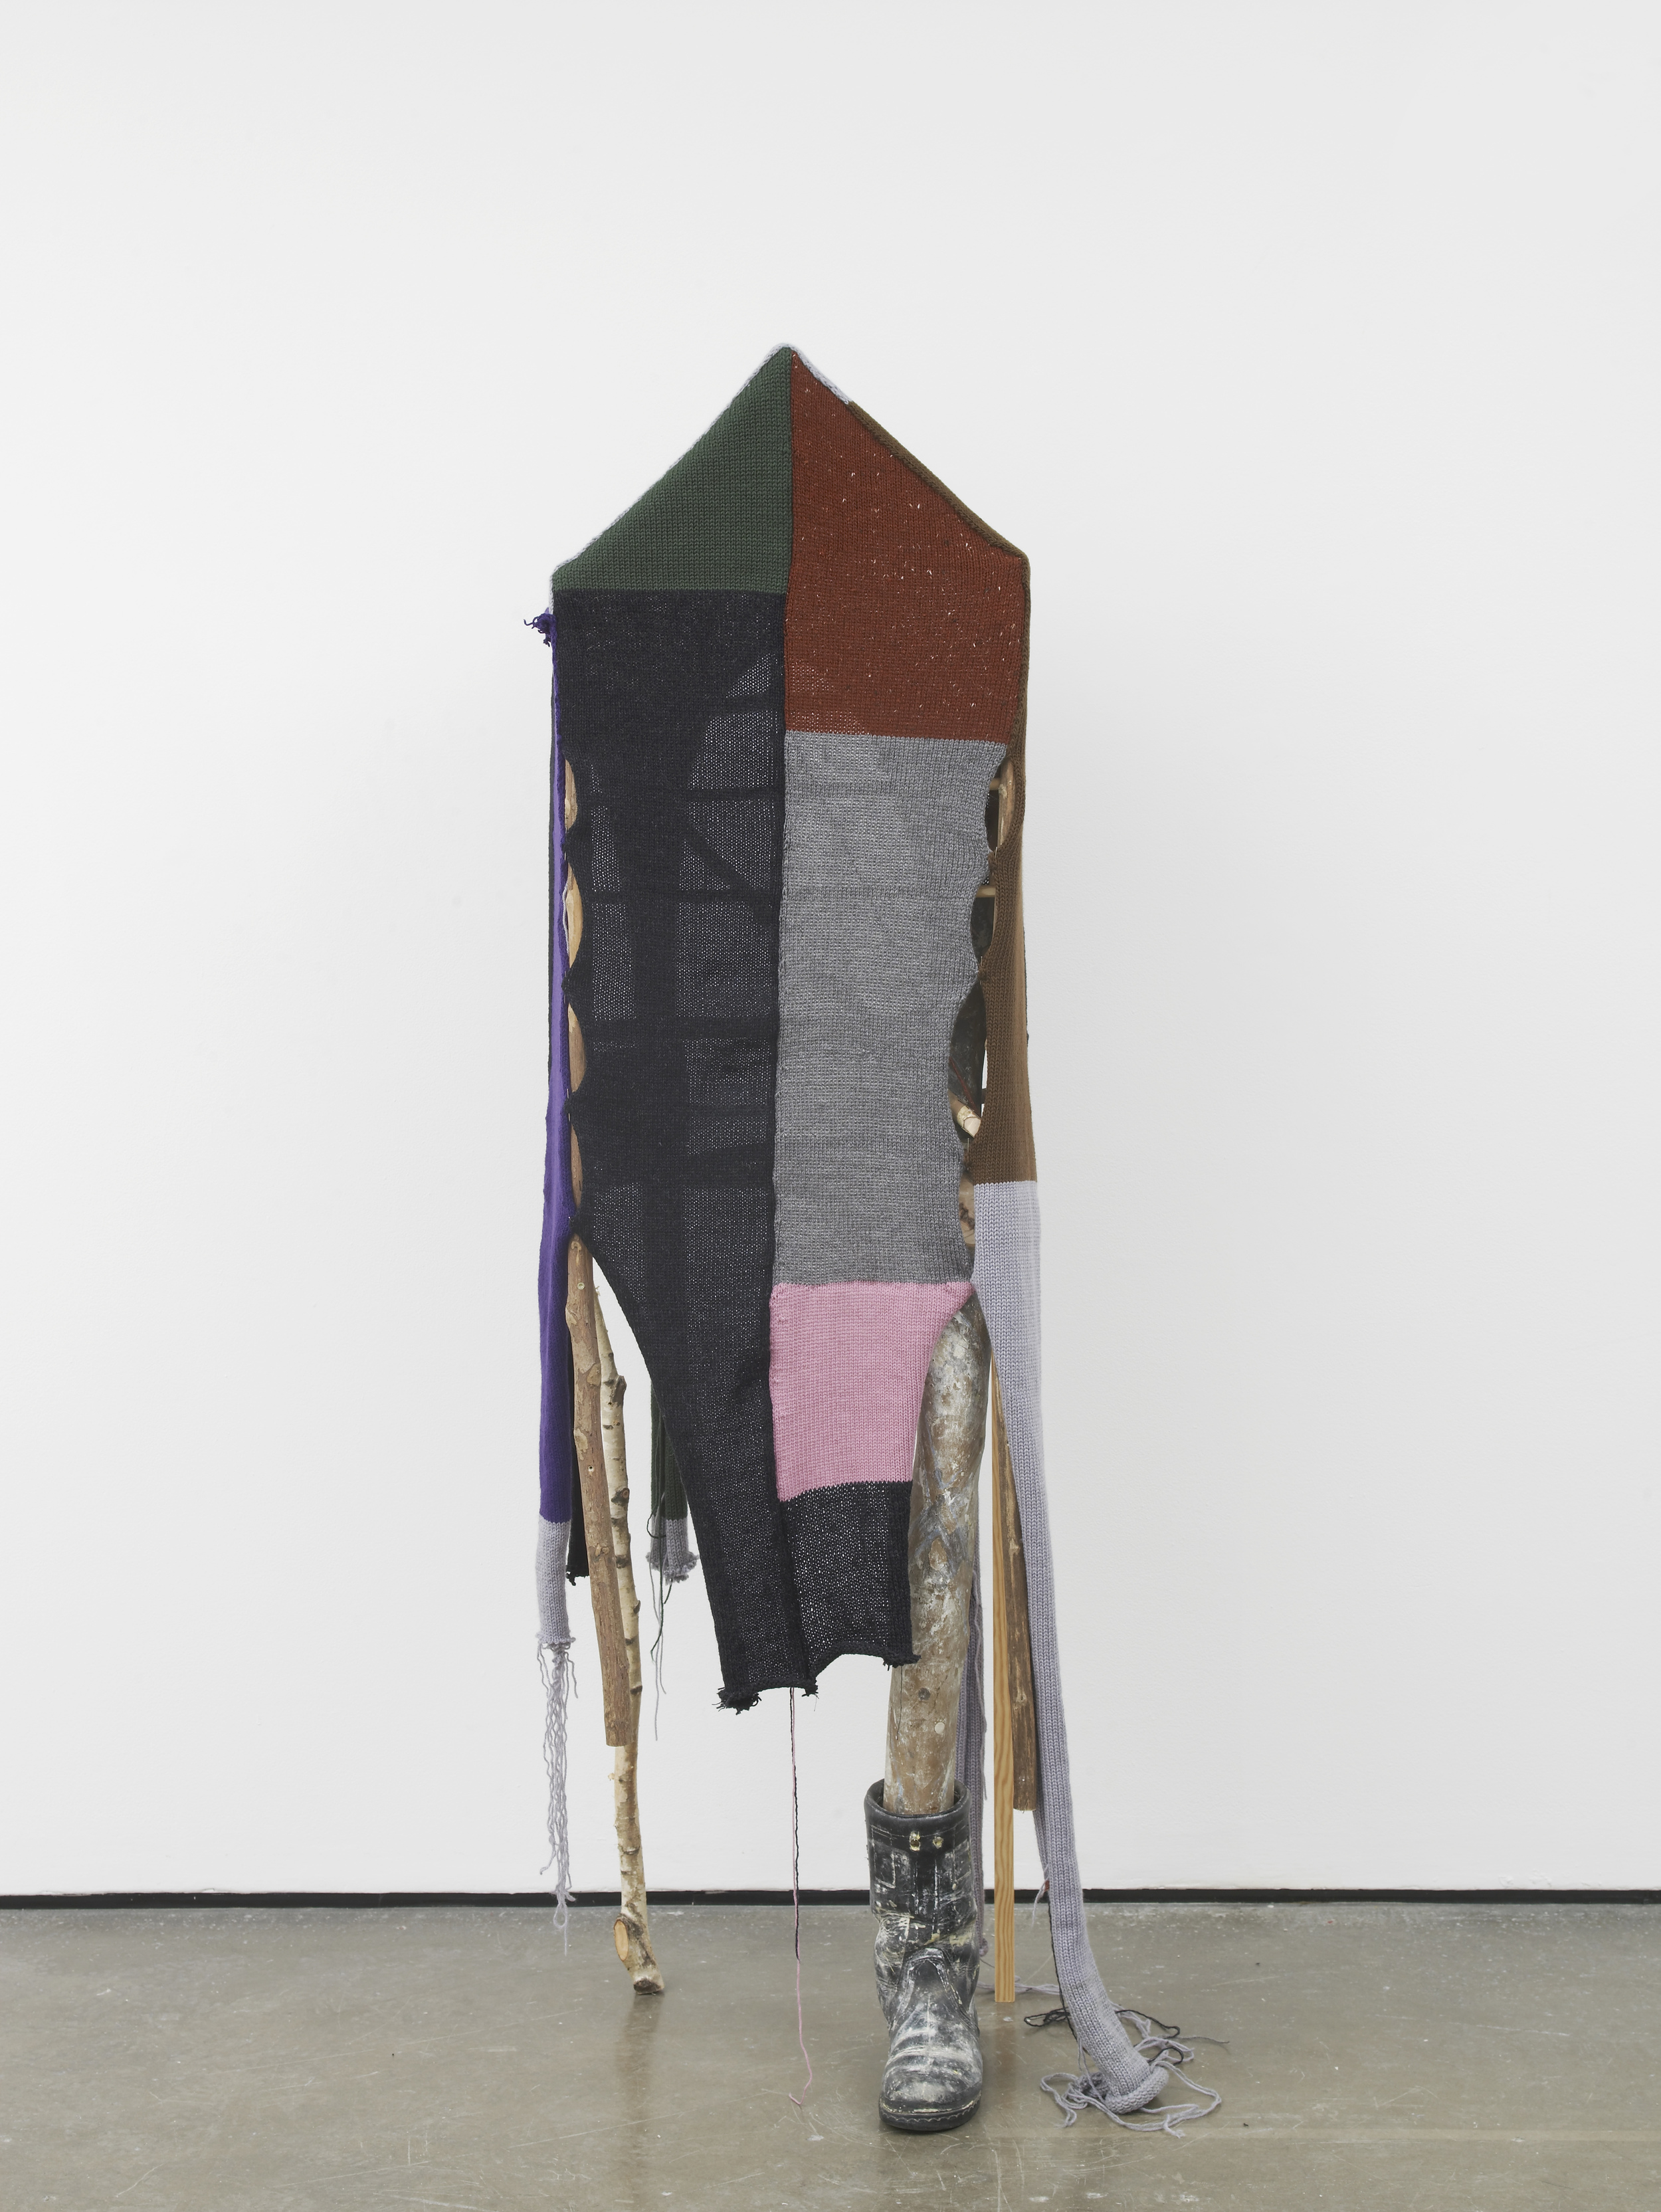     Walking house 2016 Leather boot, plaster, wood, metal, wool 184 x 50 x 60 cm / 72.4 x 19.6 x 23.6 in 